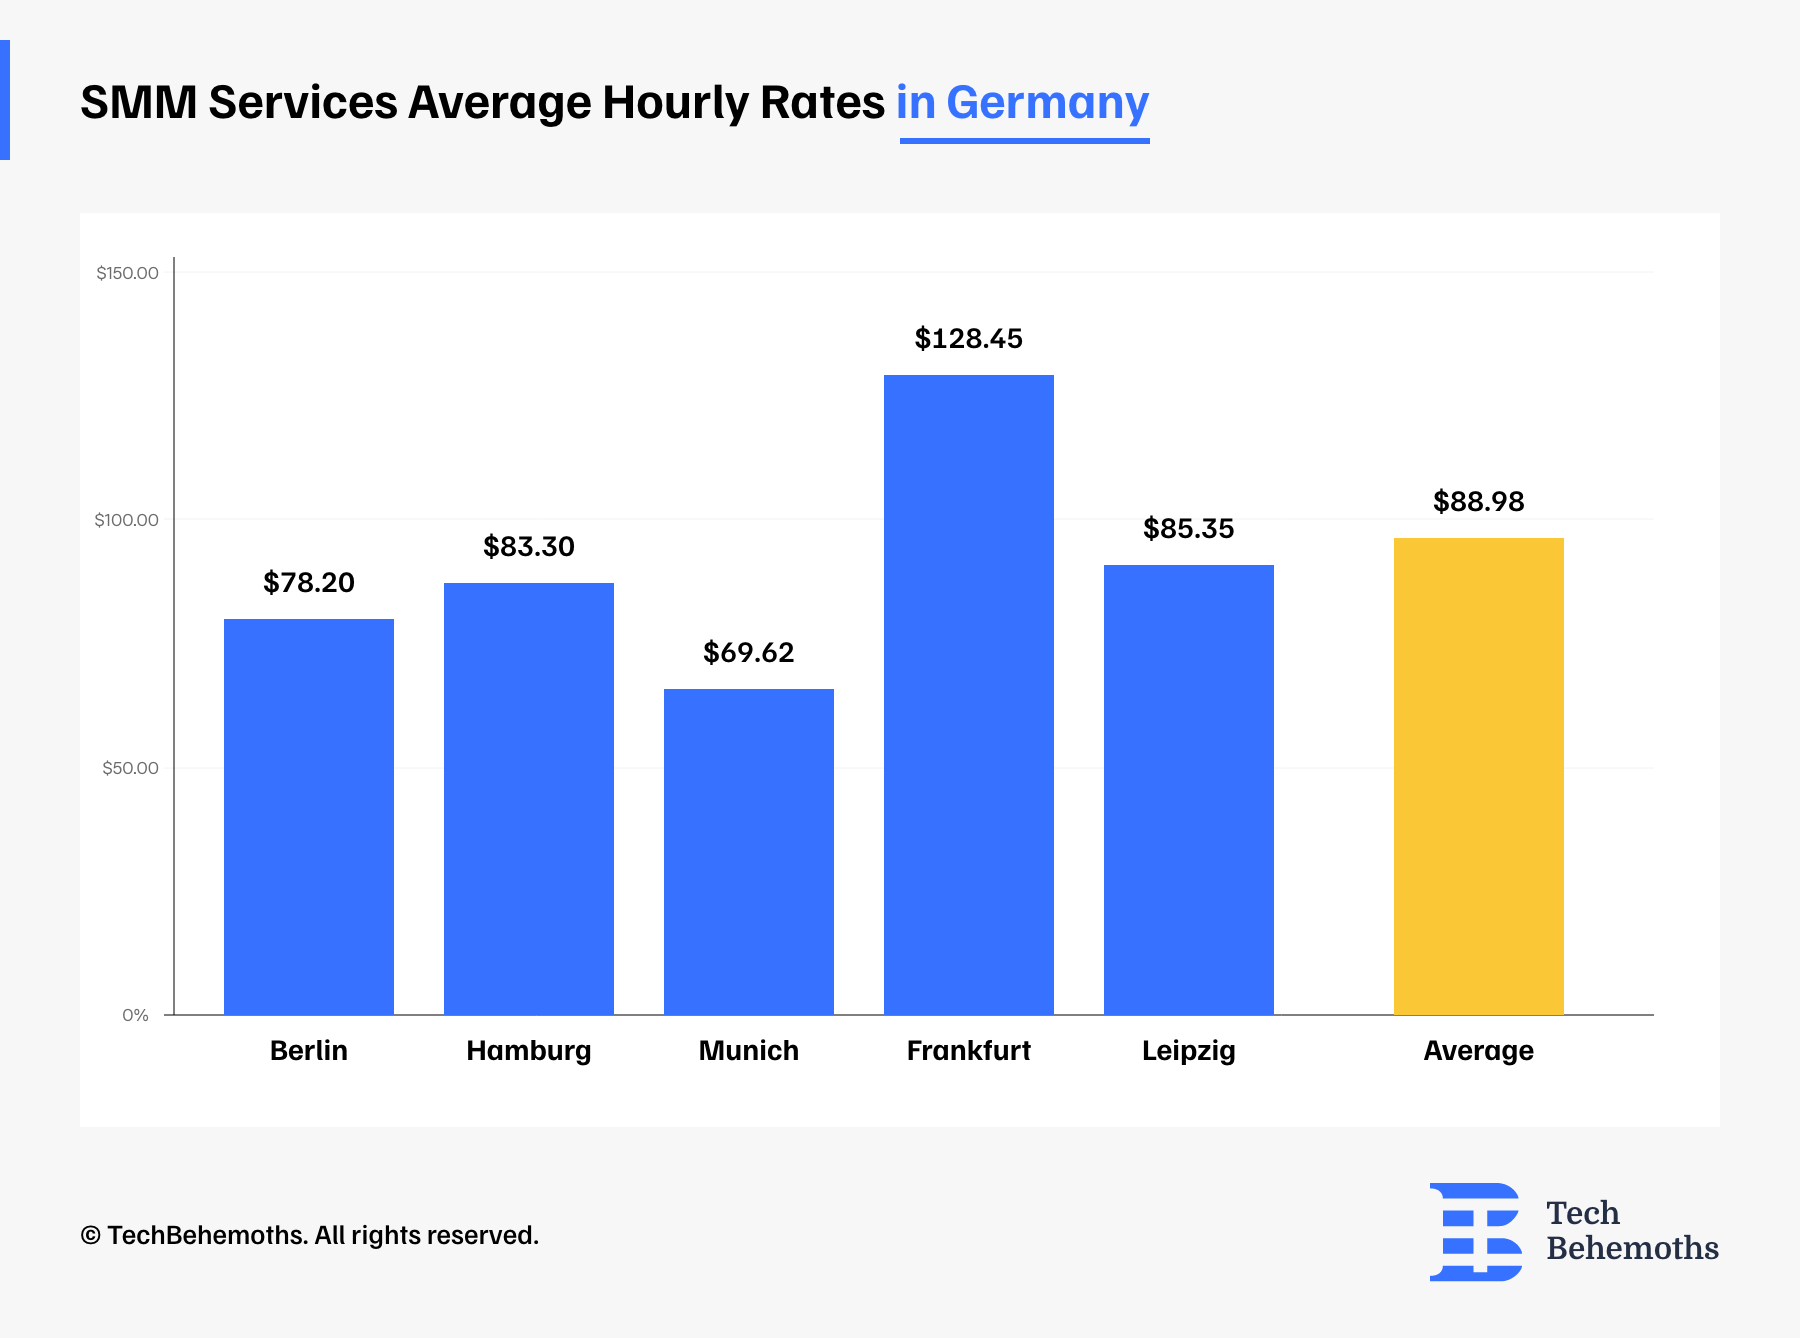 Average hourly rates for SMM services in Germany based on the rates of 5 largest tech hubs in the country